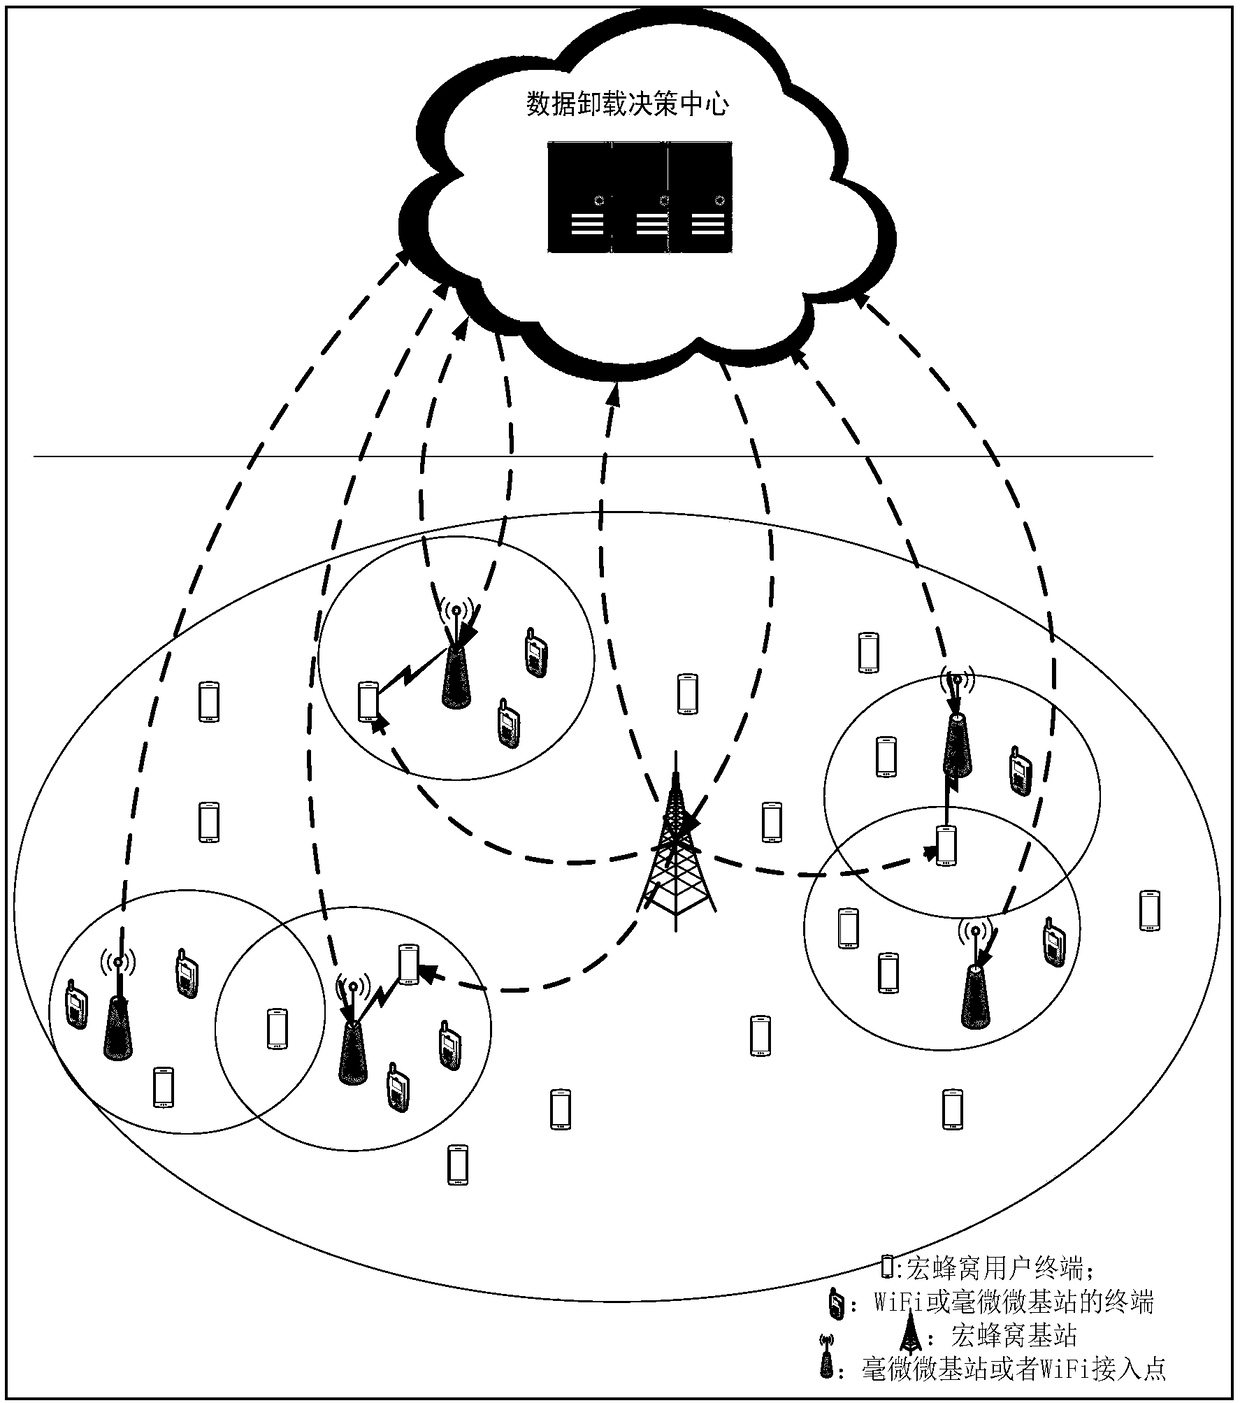 A pricing-based data offloading method in heterogeneous wireless networks